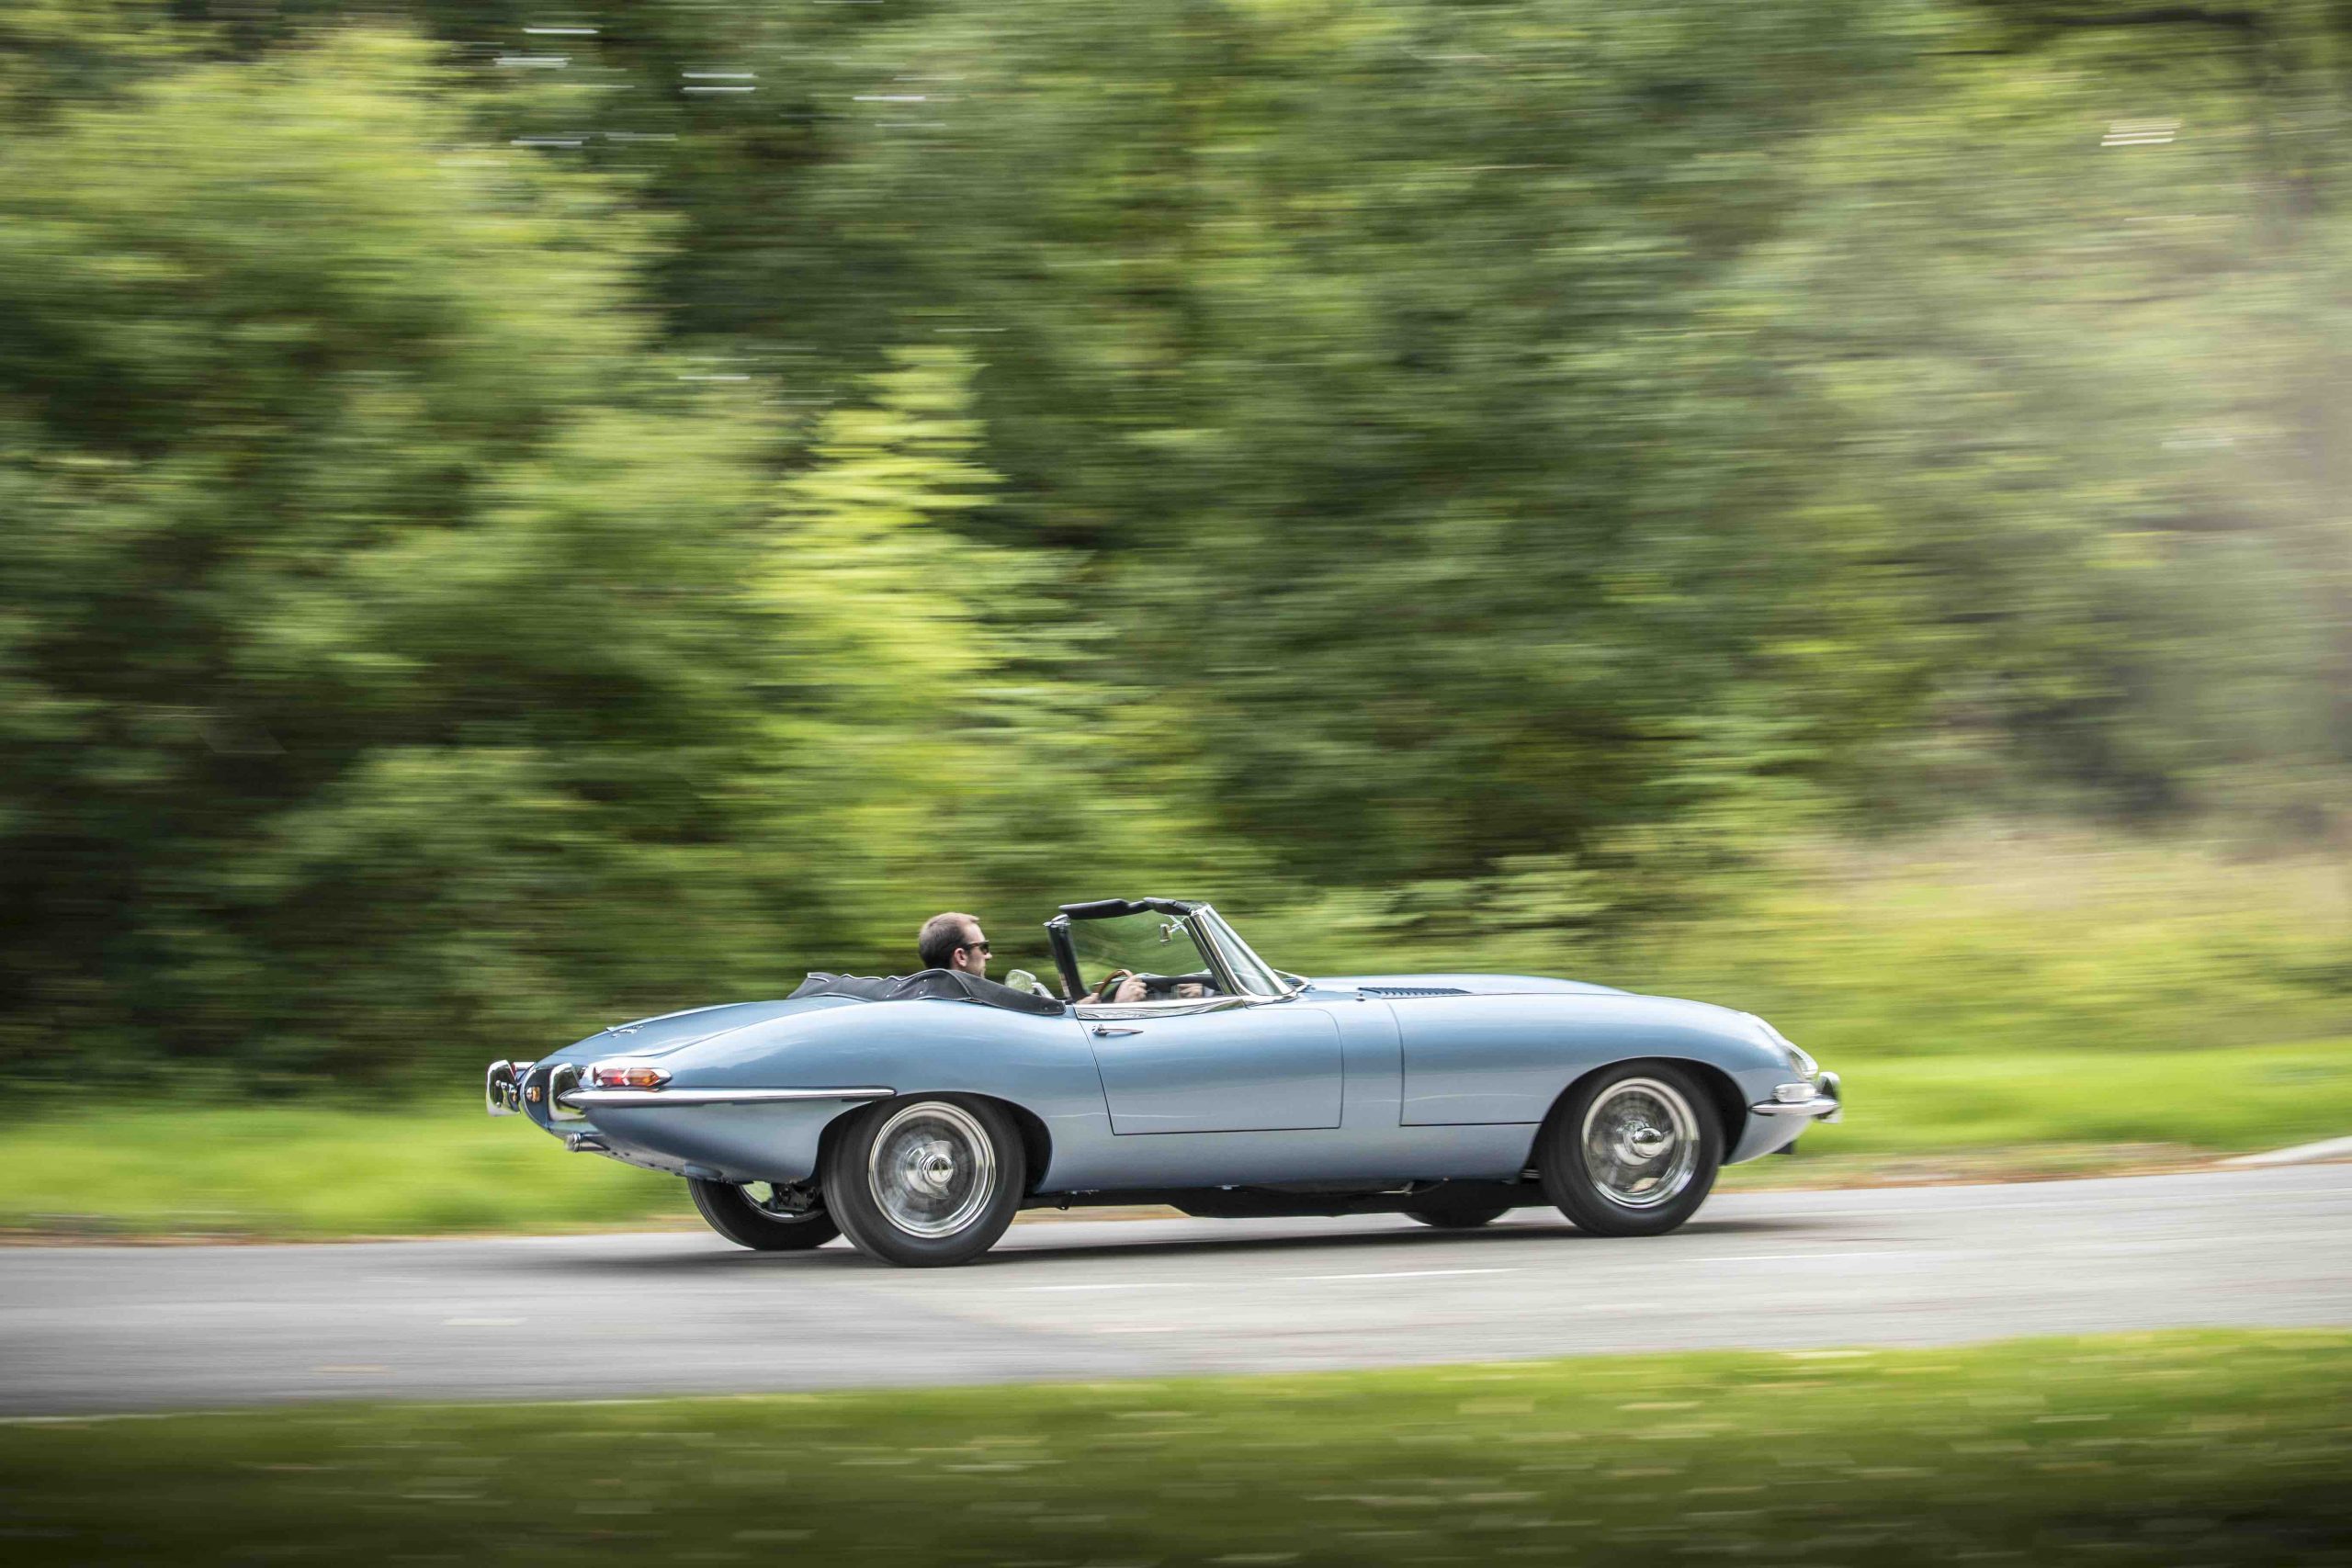 Feel the wind in your hair with our British sports car quiz